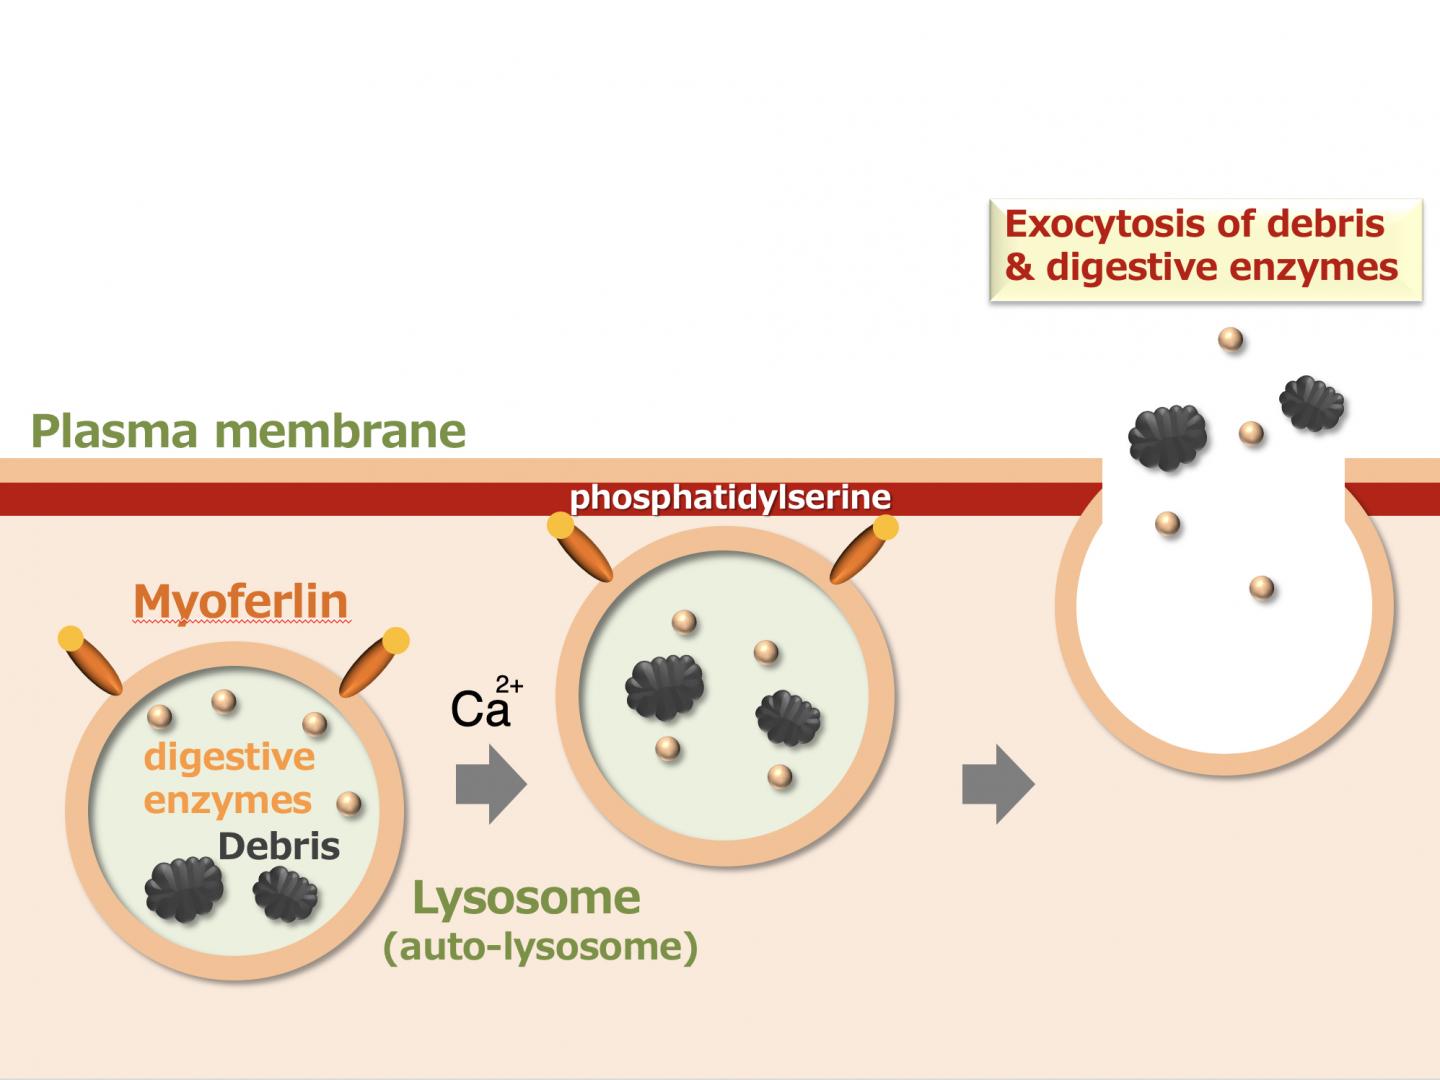 Figure 1. Myoferlin is a Protein Expressed on the Surface of Lysosomes